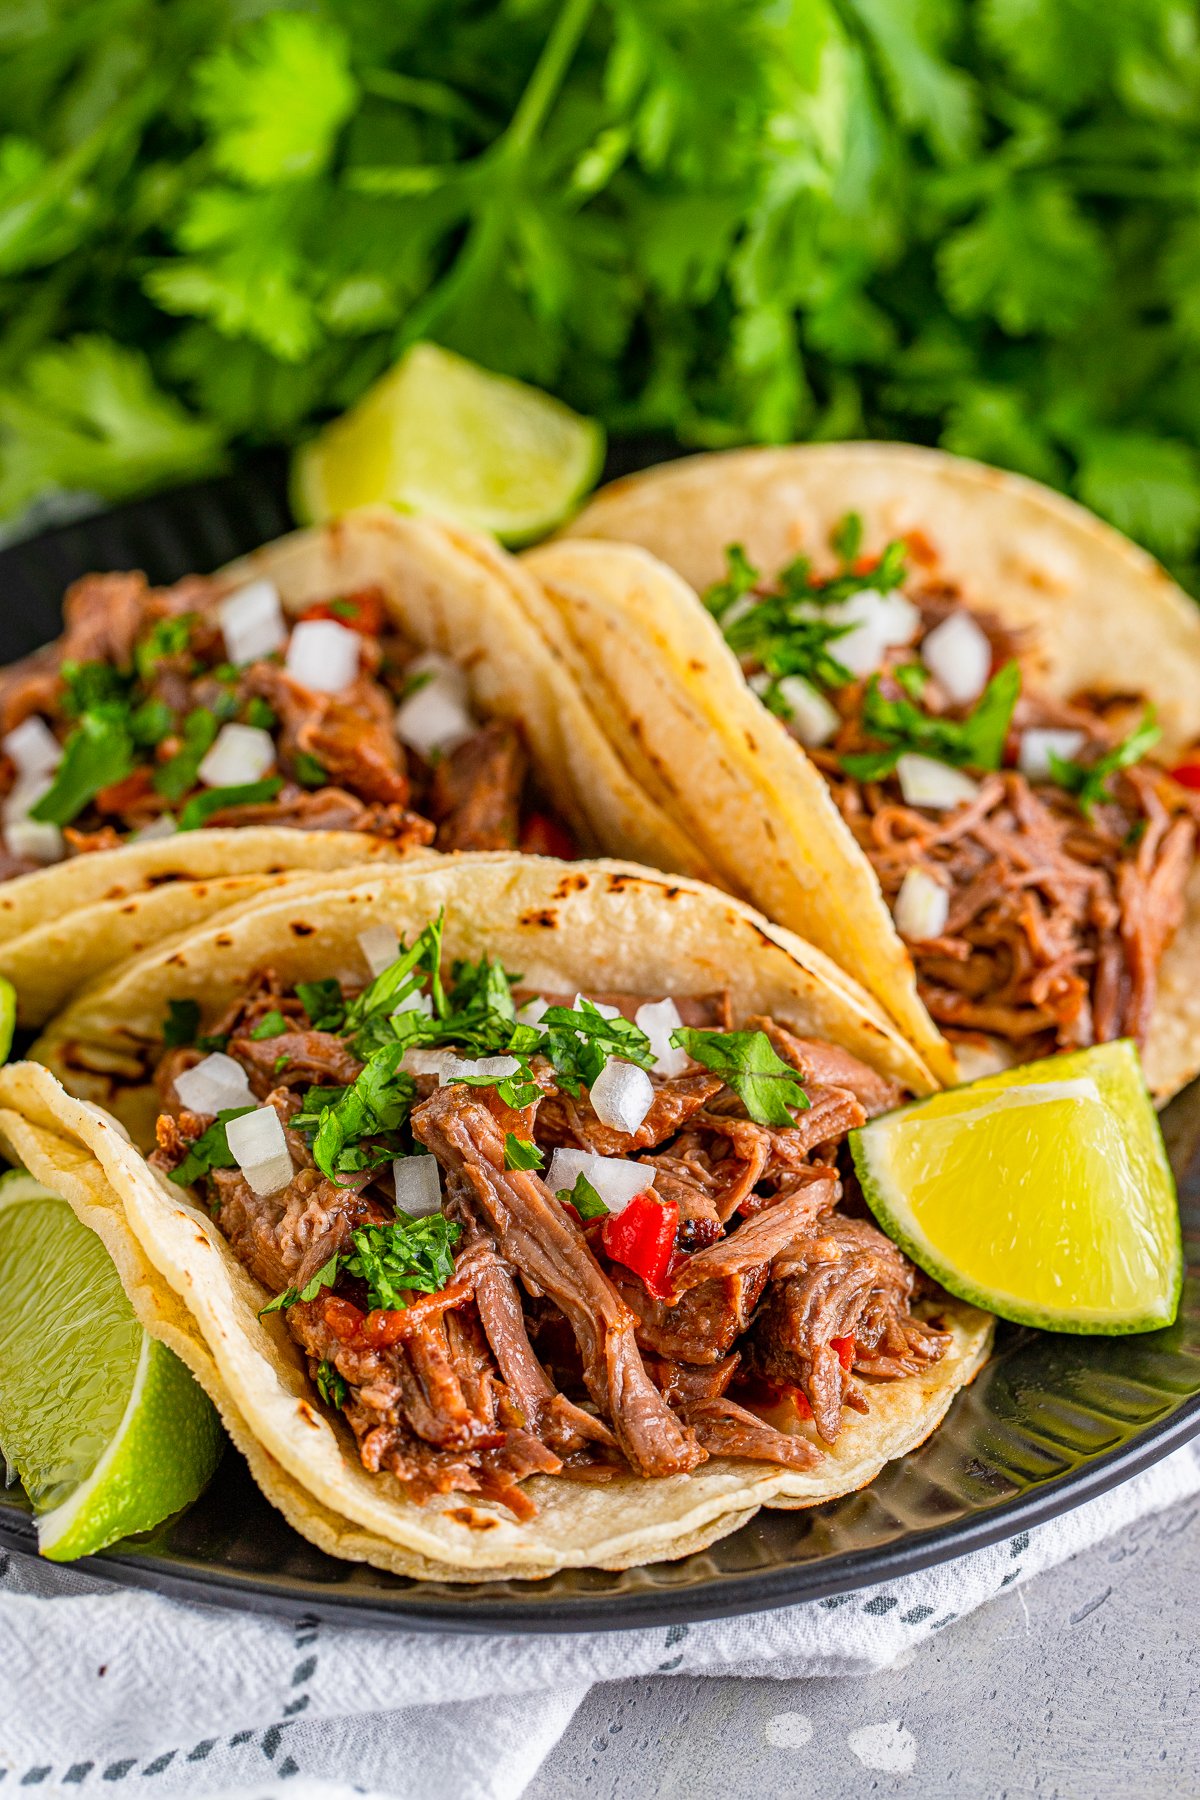 Three Shredded Beef Tacos on black plate with toppings and lime garnishes.